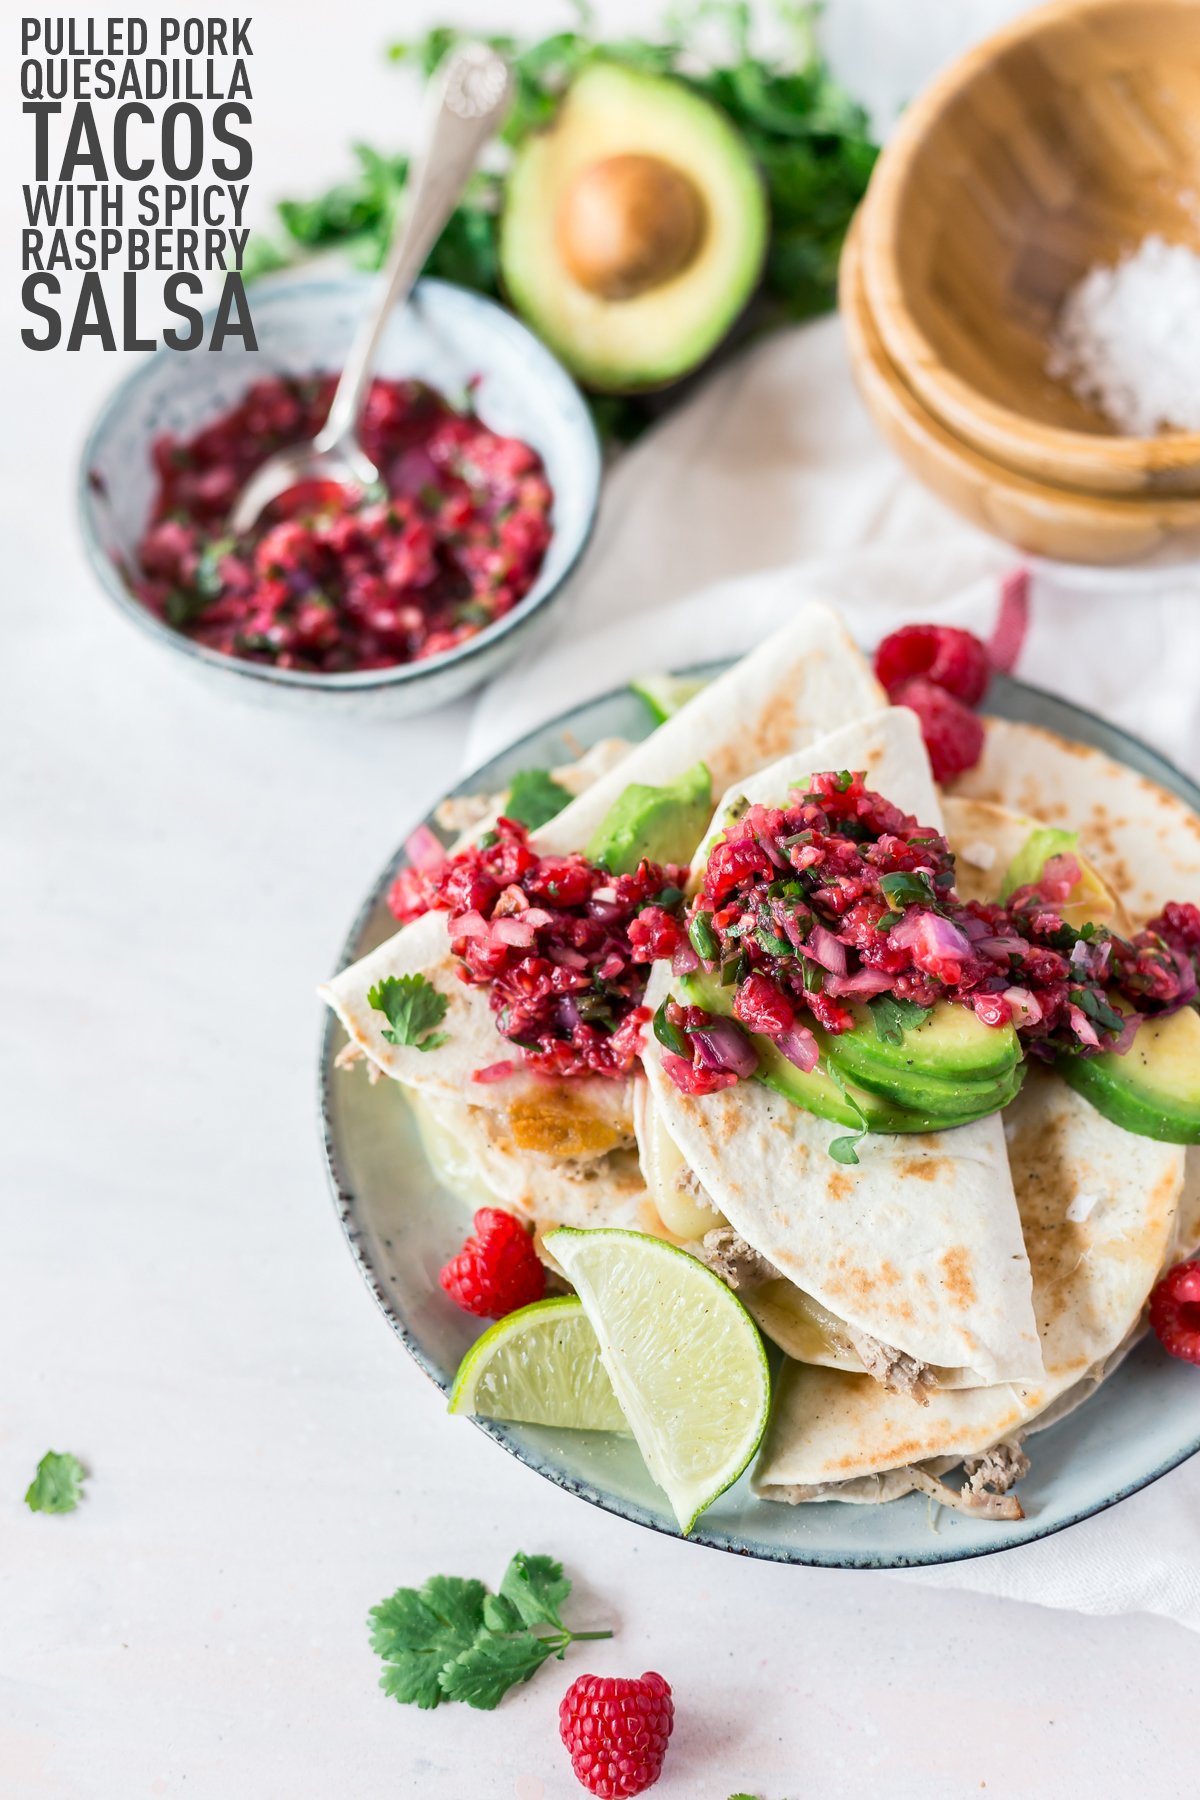 In terms of easy Mexican recipes, these quick and tasty pulled pork quesadilla tacos with spicy raspberry salsa are ready in 30 minutes! Dinner is served! | asimplepantry.com